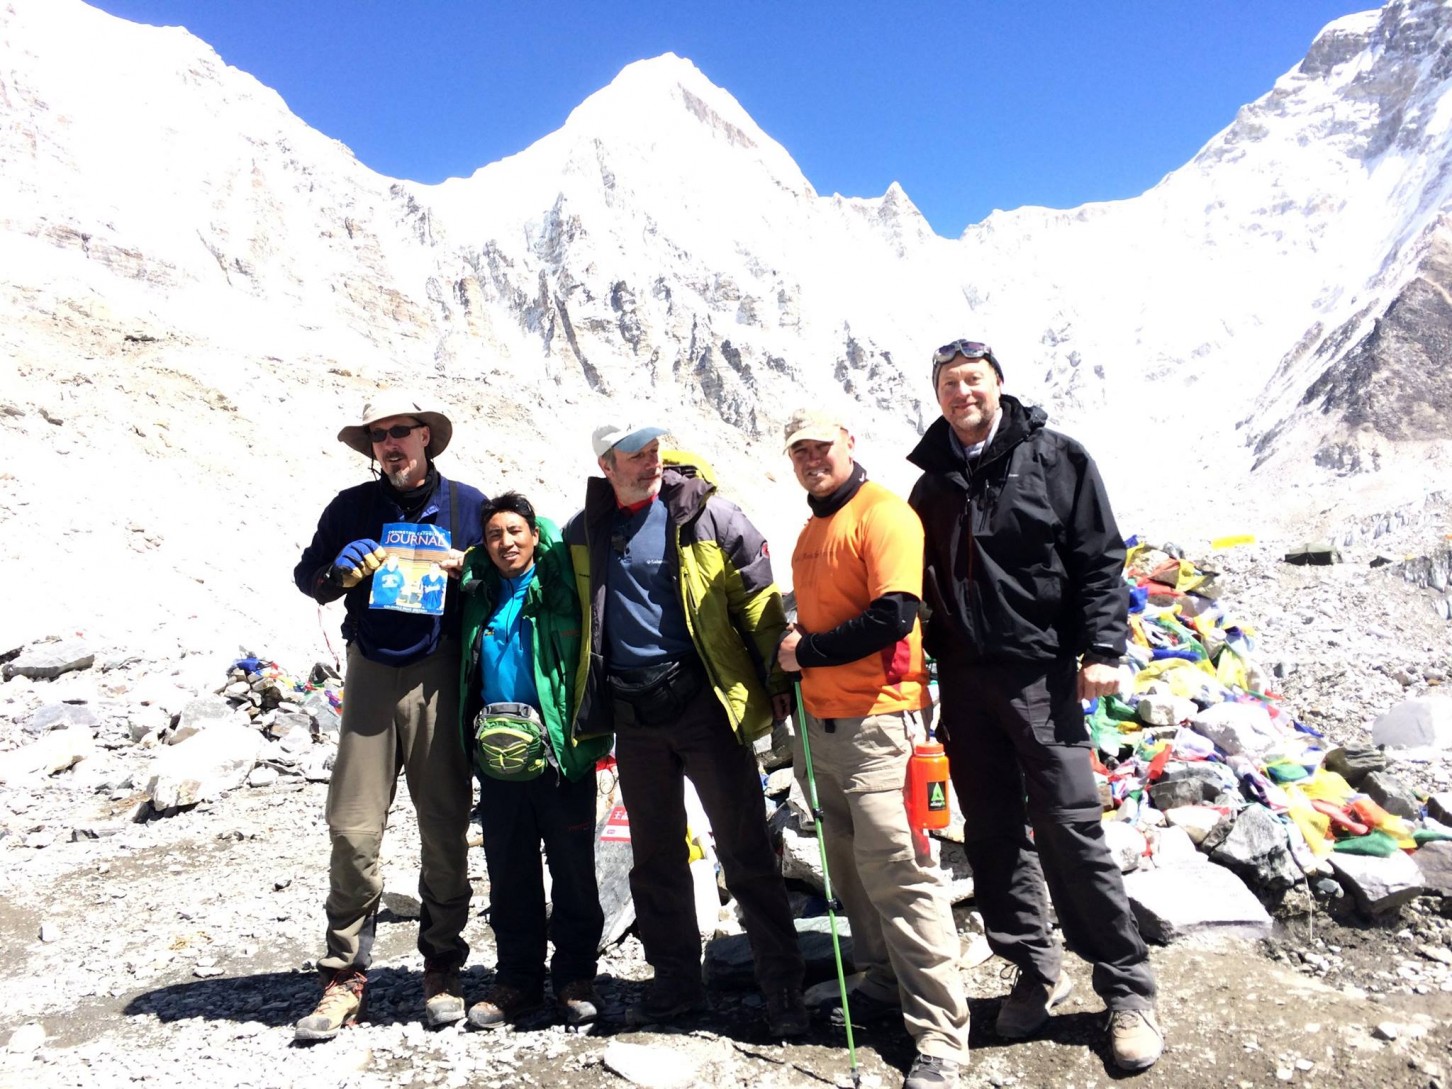 15 Things You Need to Know Before Trekking to Everest Base Camp